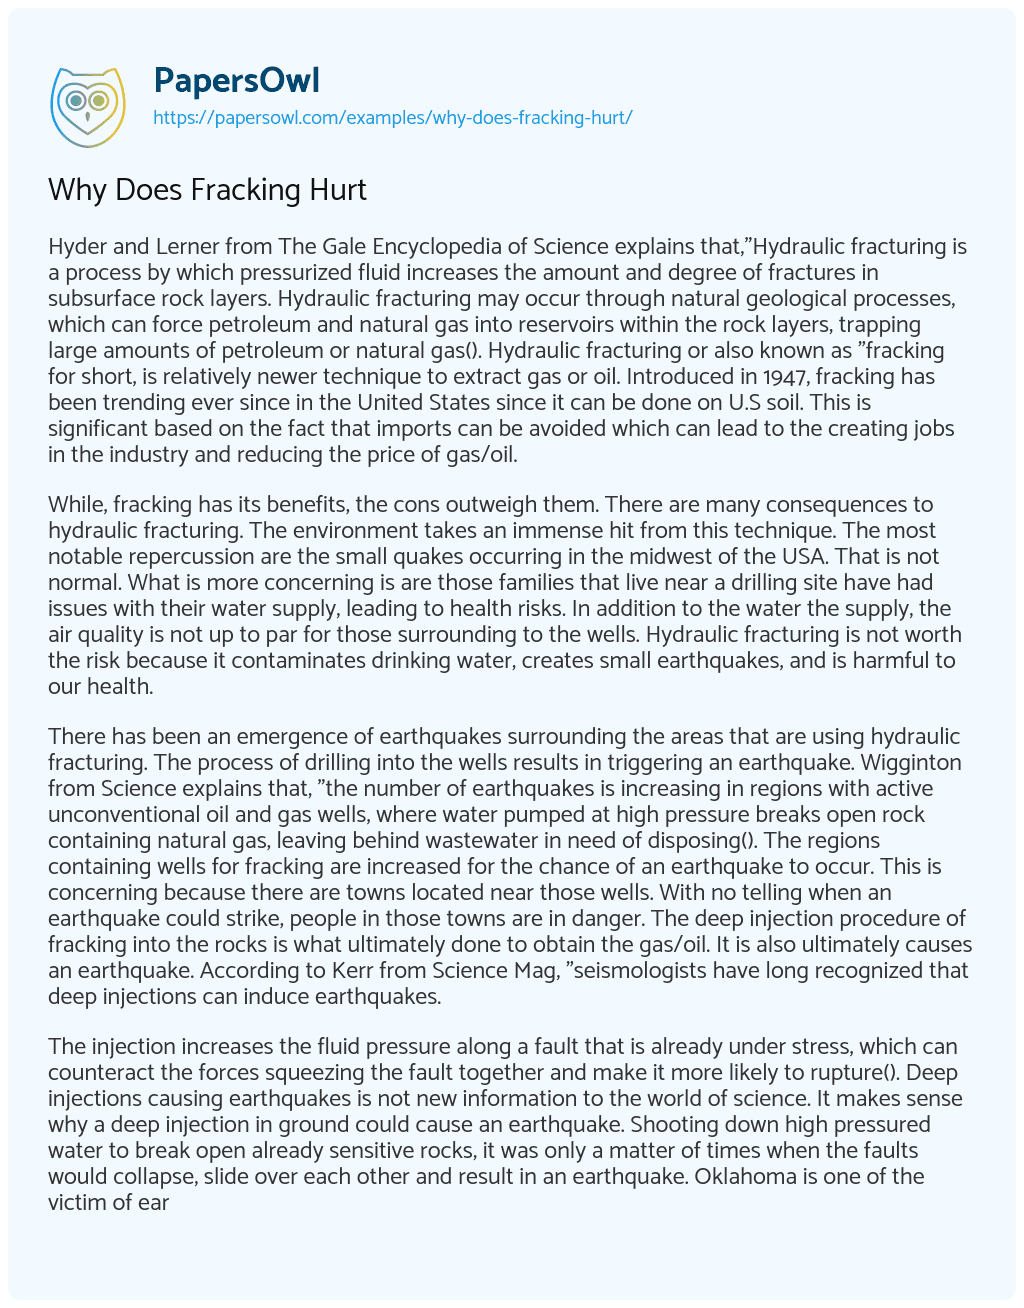 Essay on Why does Fracking Hurt